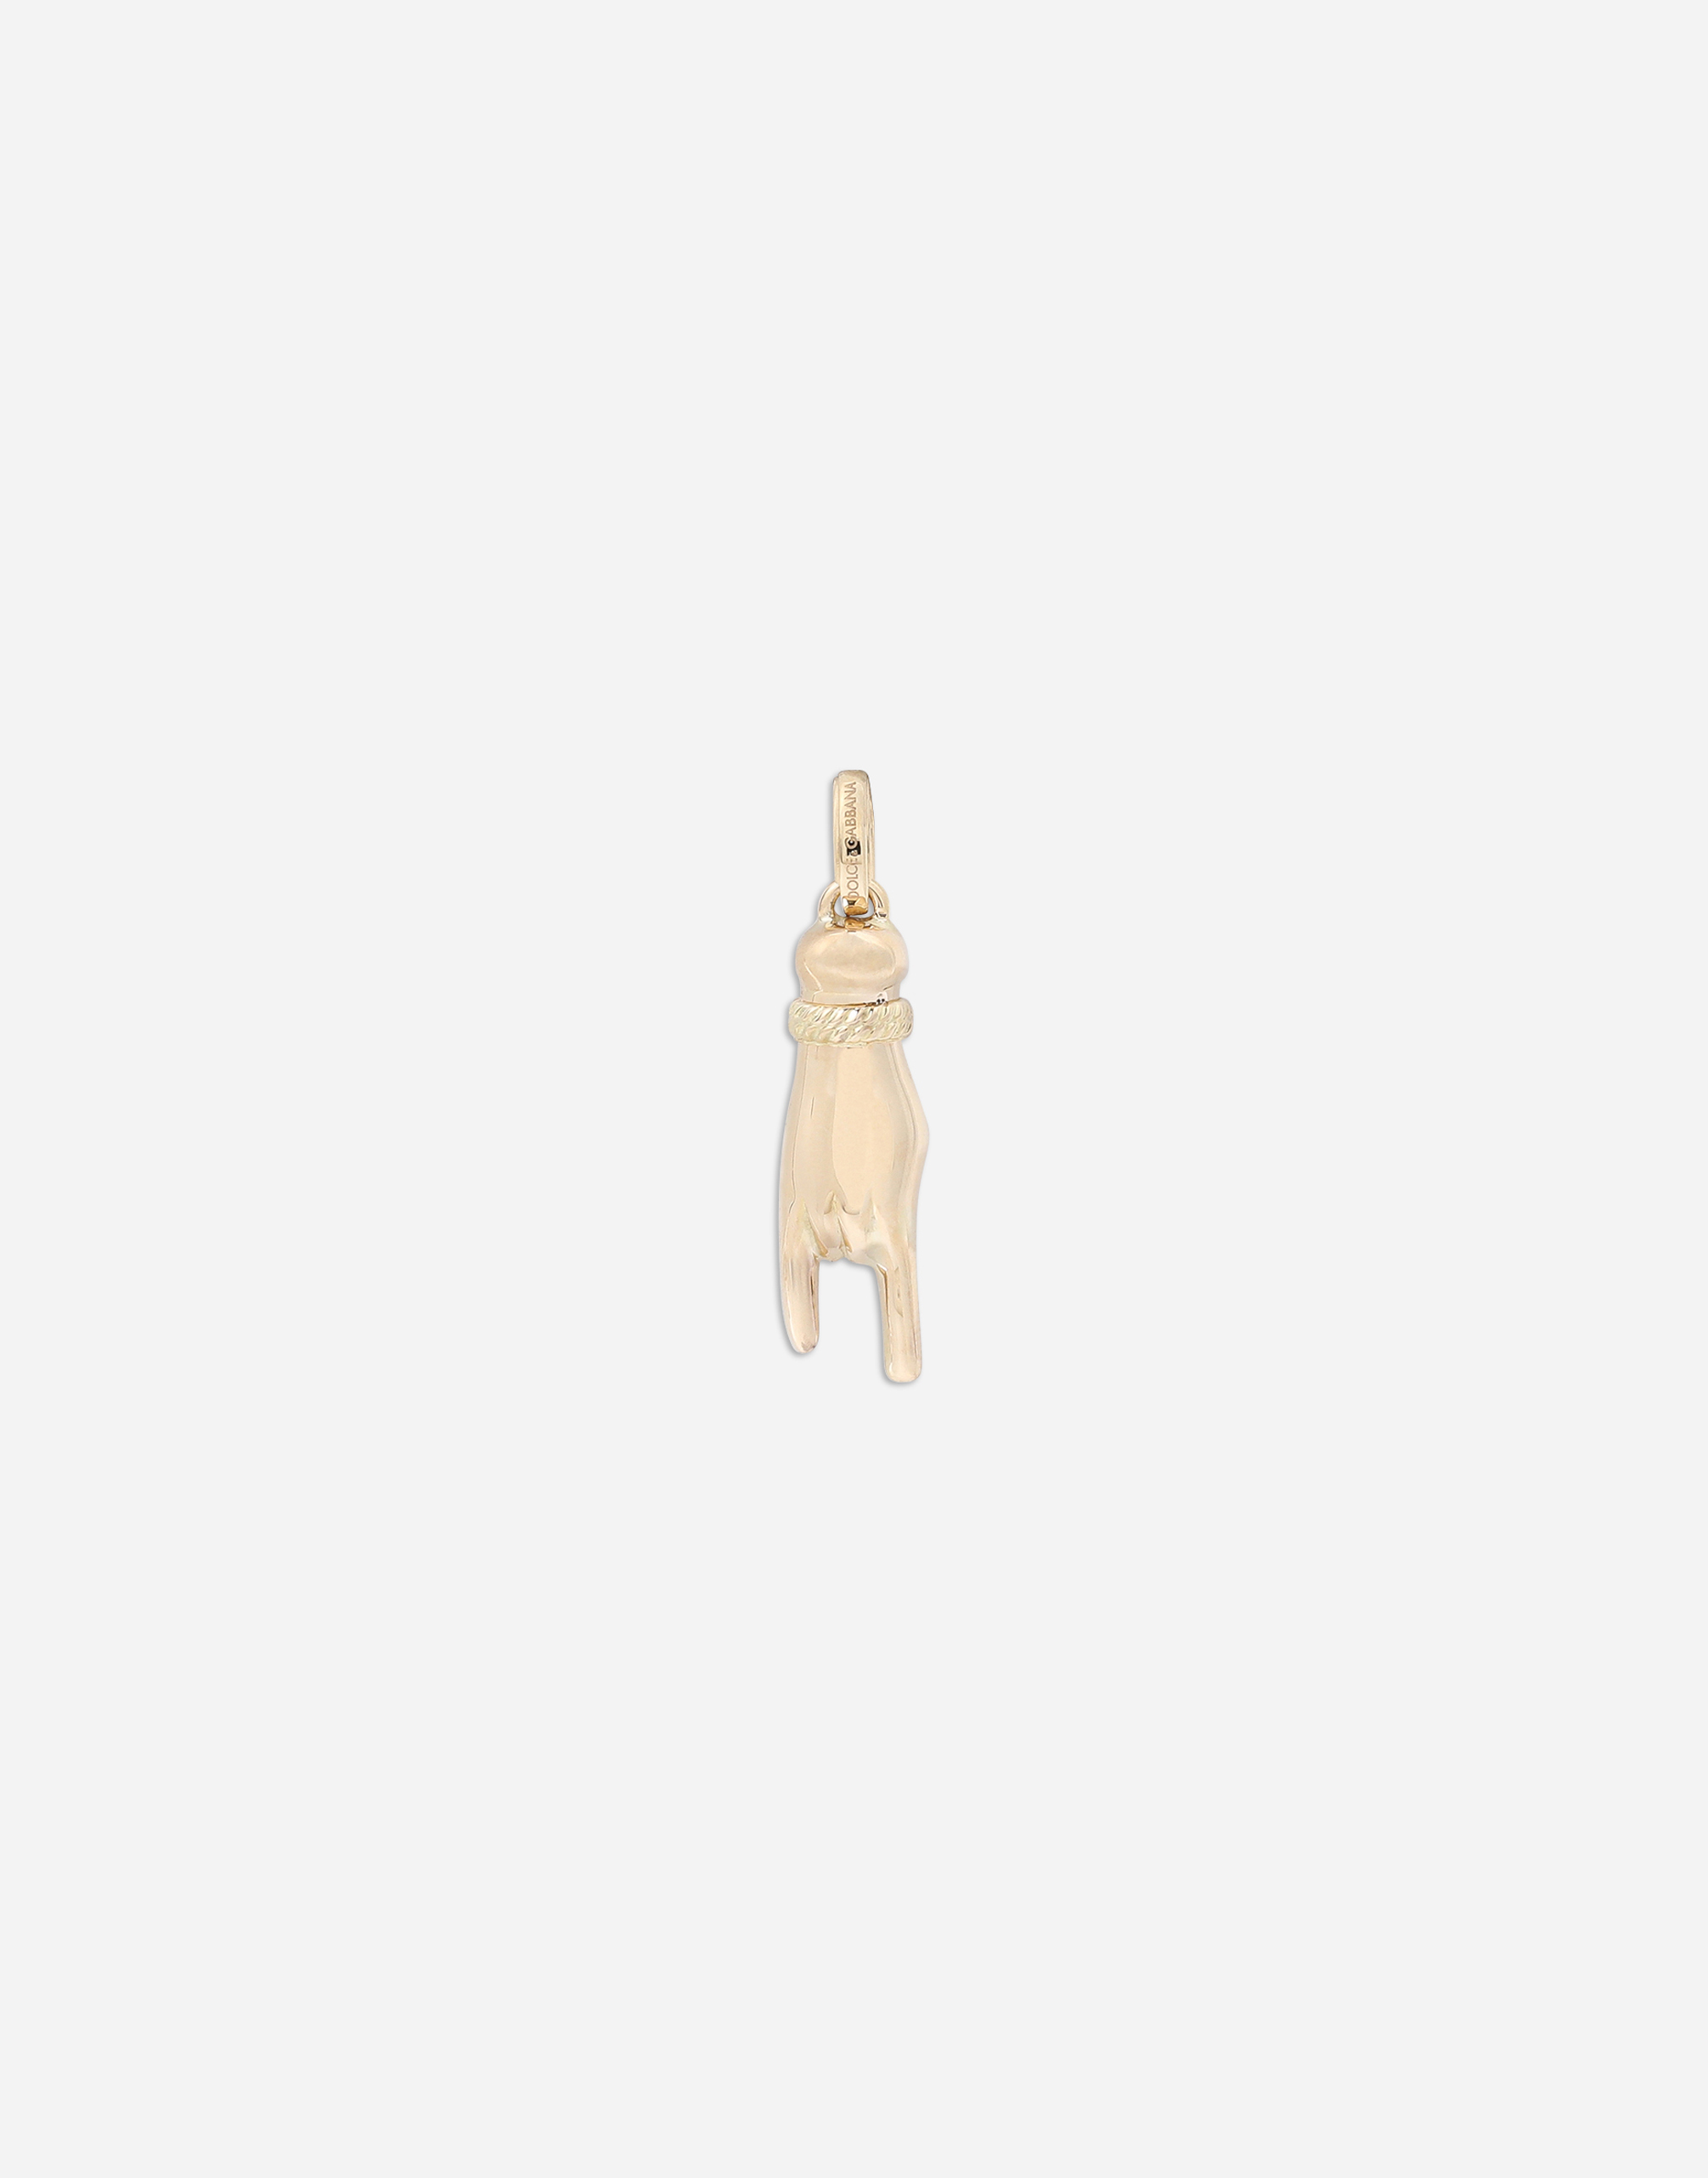 Good Luck yellow gold charm in Yellow gold